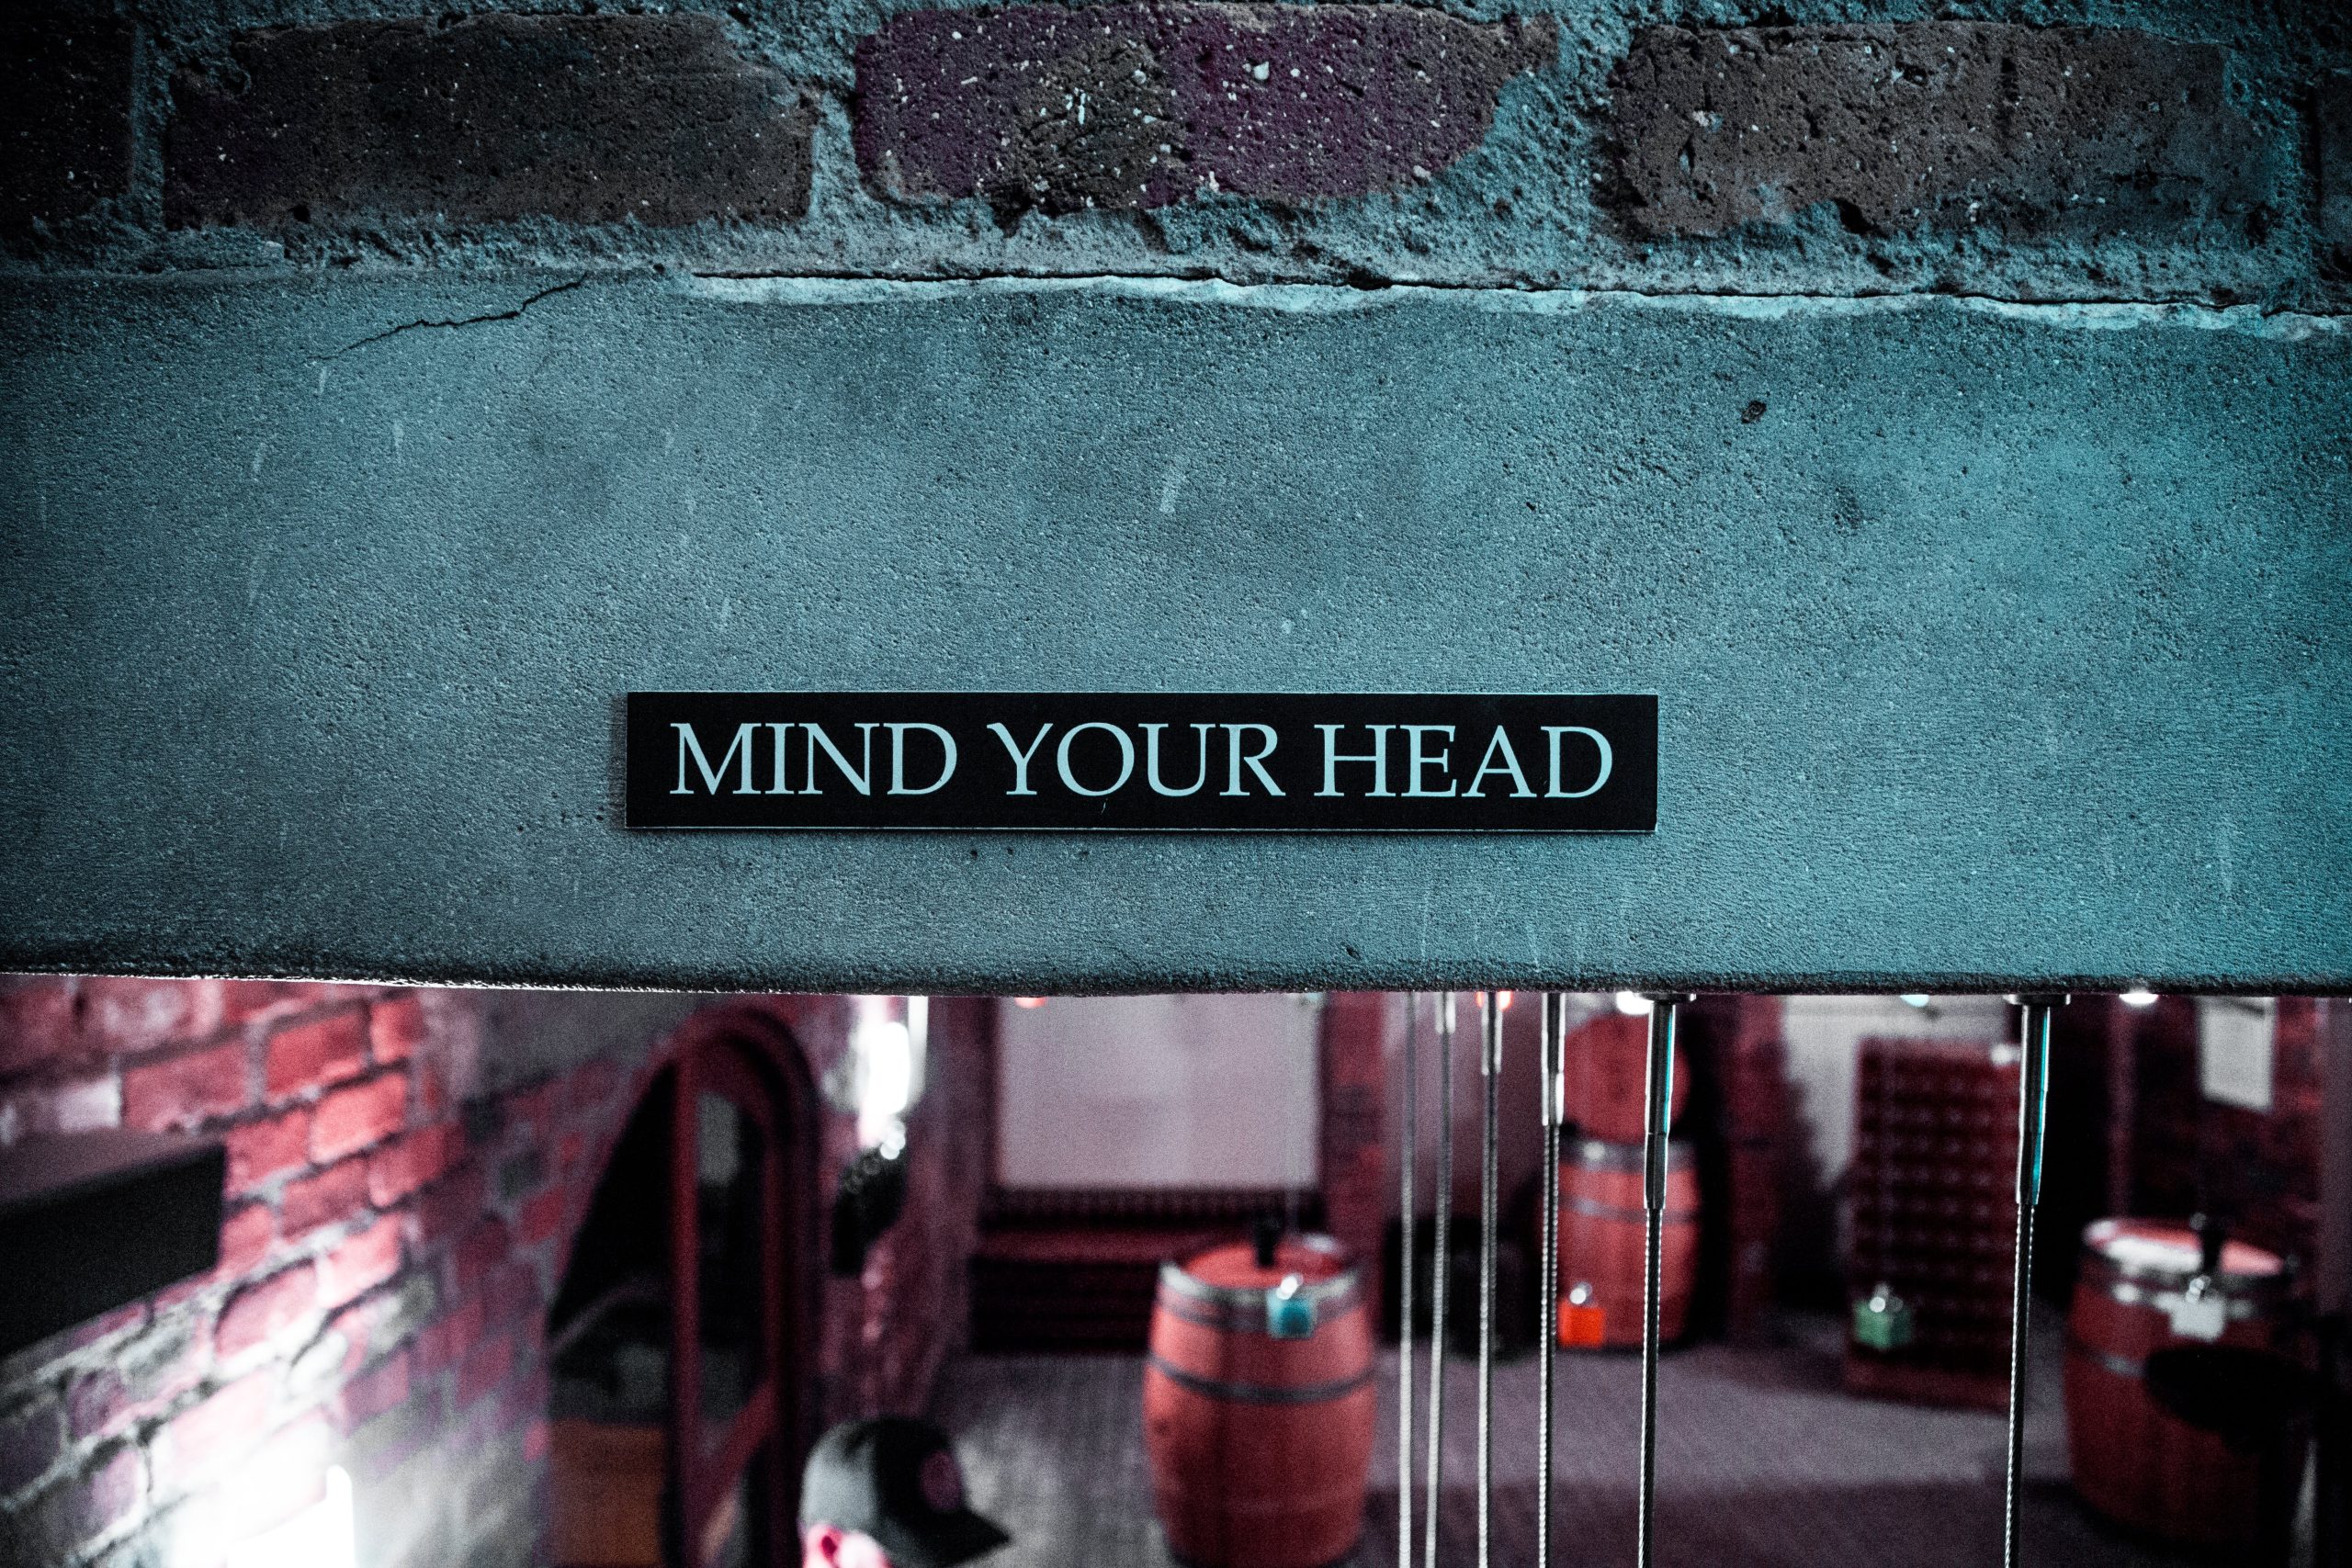 A sign on a brick wall that says, "Mind your head."